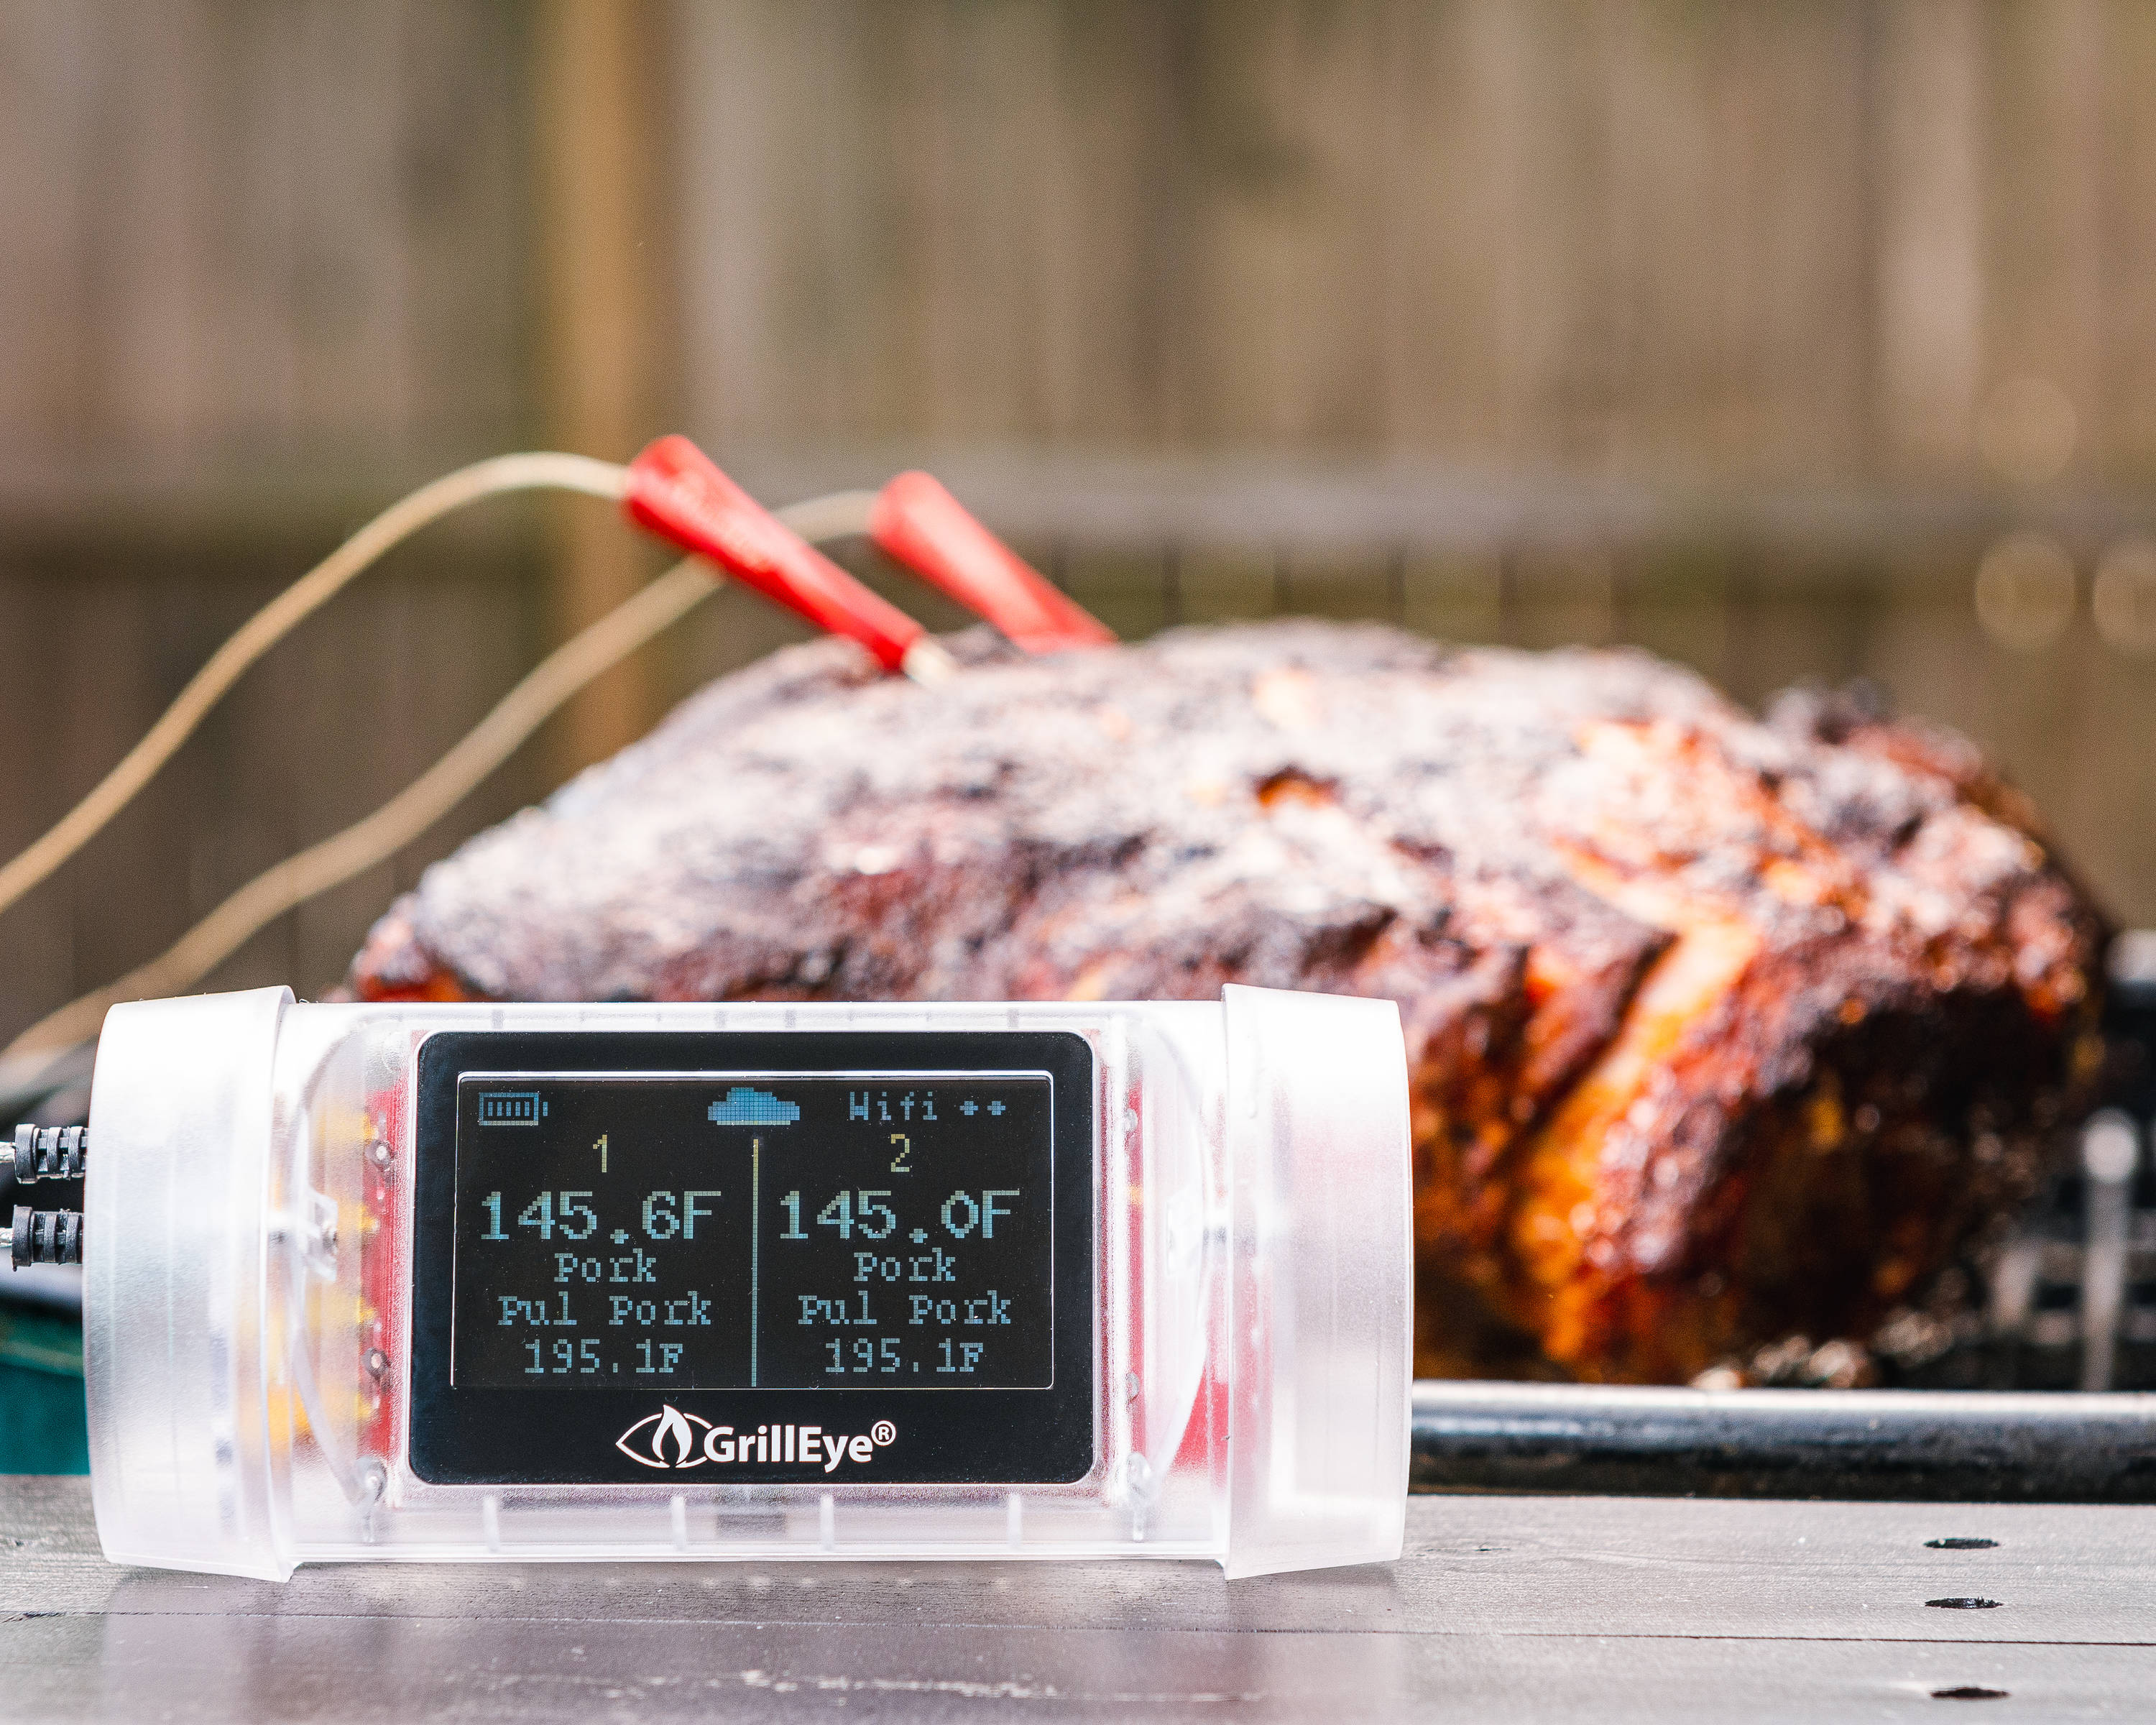 INKBIRD IBBQ-4T Square Dial Wireless BBQ Meat Thermometer